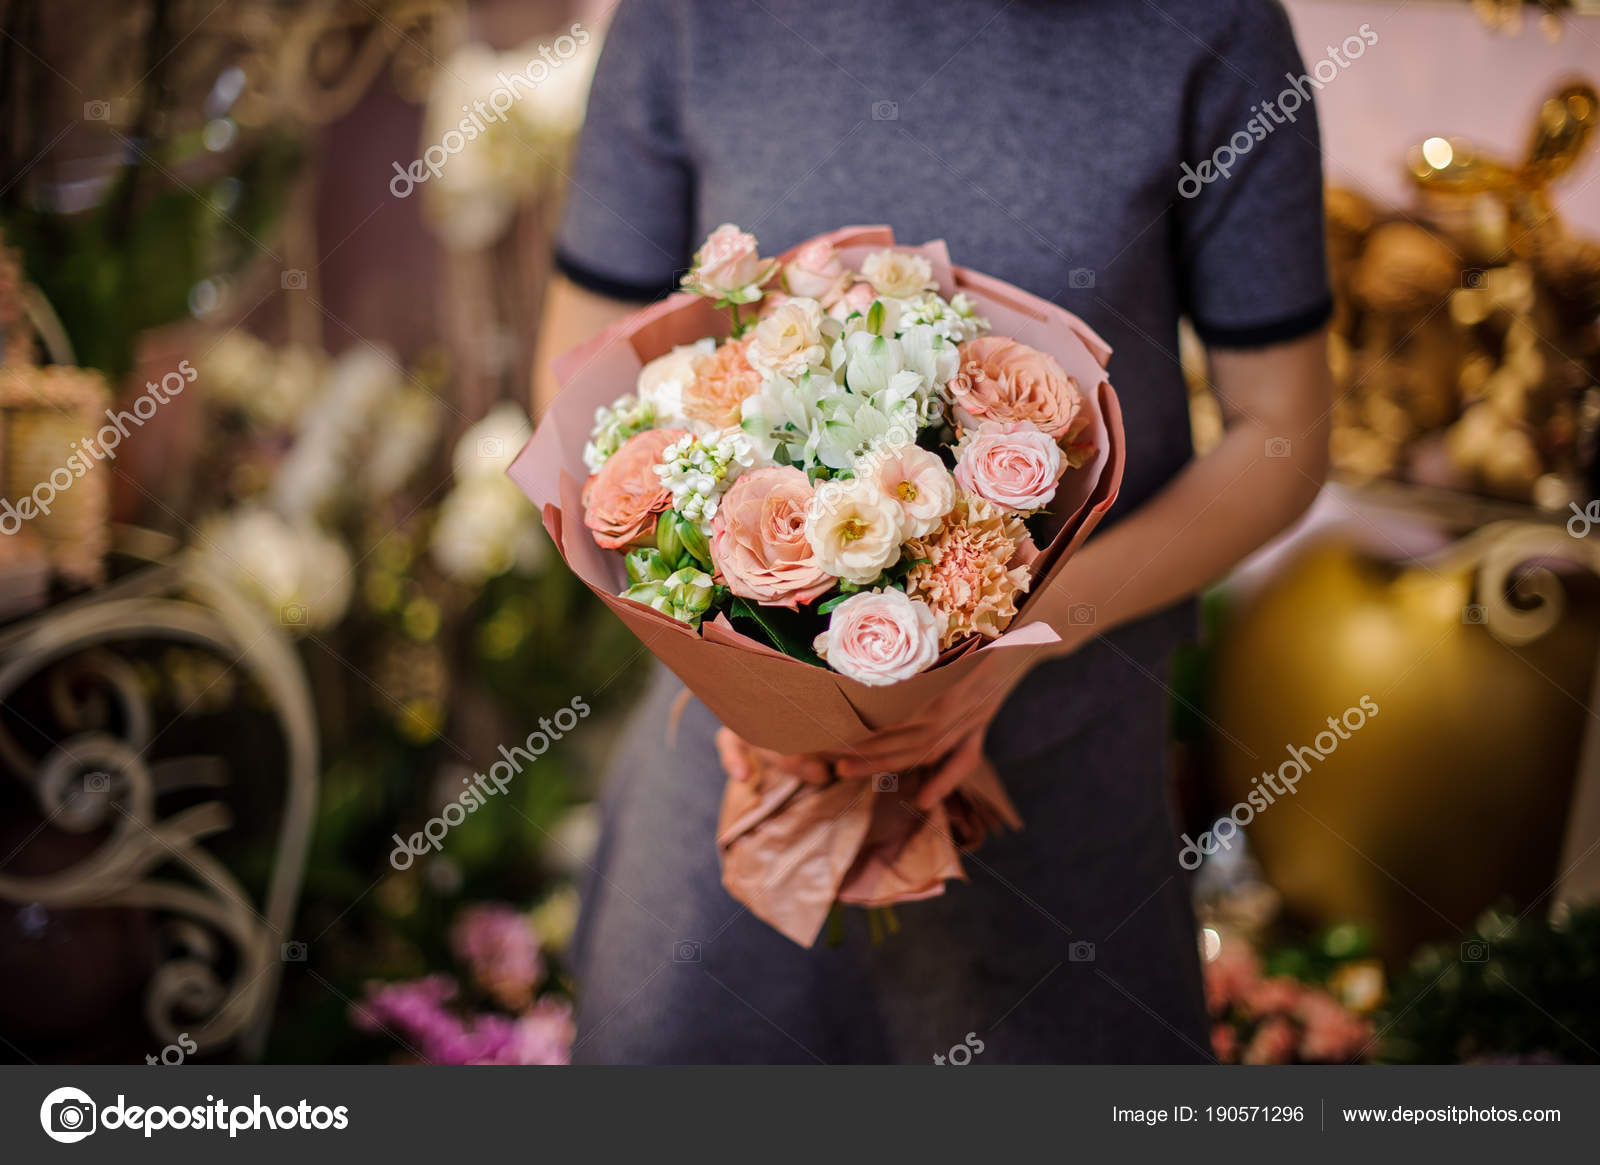 Colourful Flower Arrangement Wrapped in Brown Paper Stock Photo